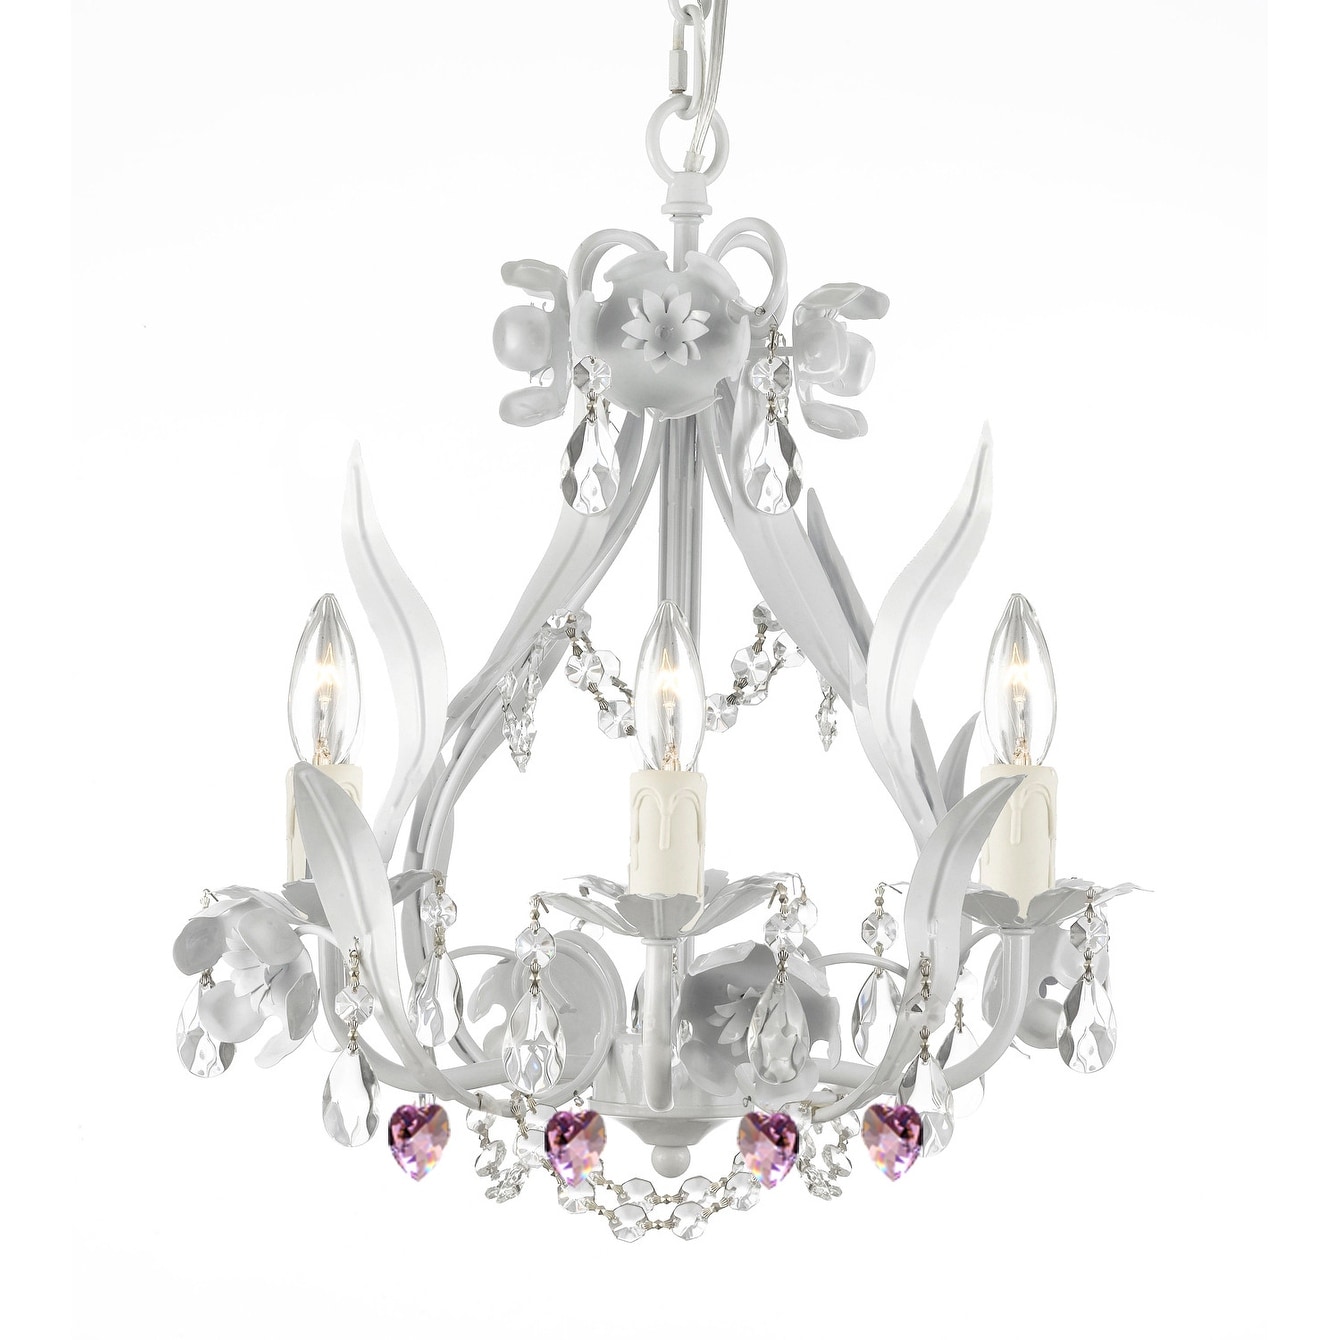 WHITE IRON CRYSTAL FLOWER CHANDELIER LIGHTING W/ PINK CRYSTAL HEARTS! 